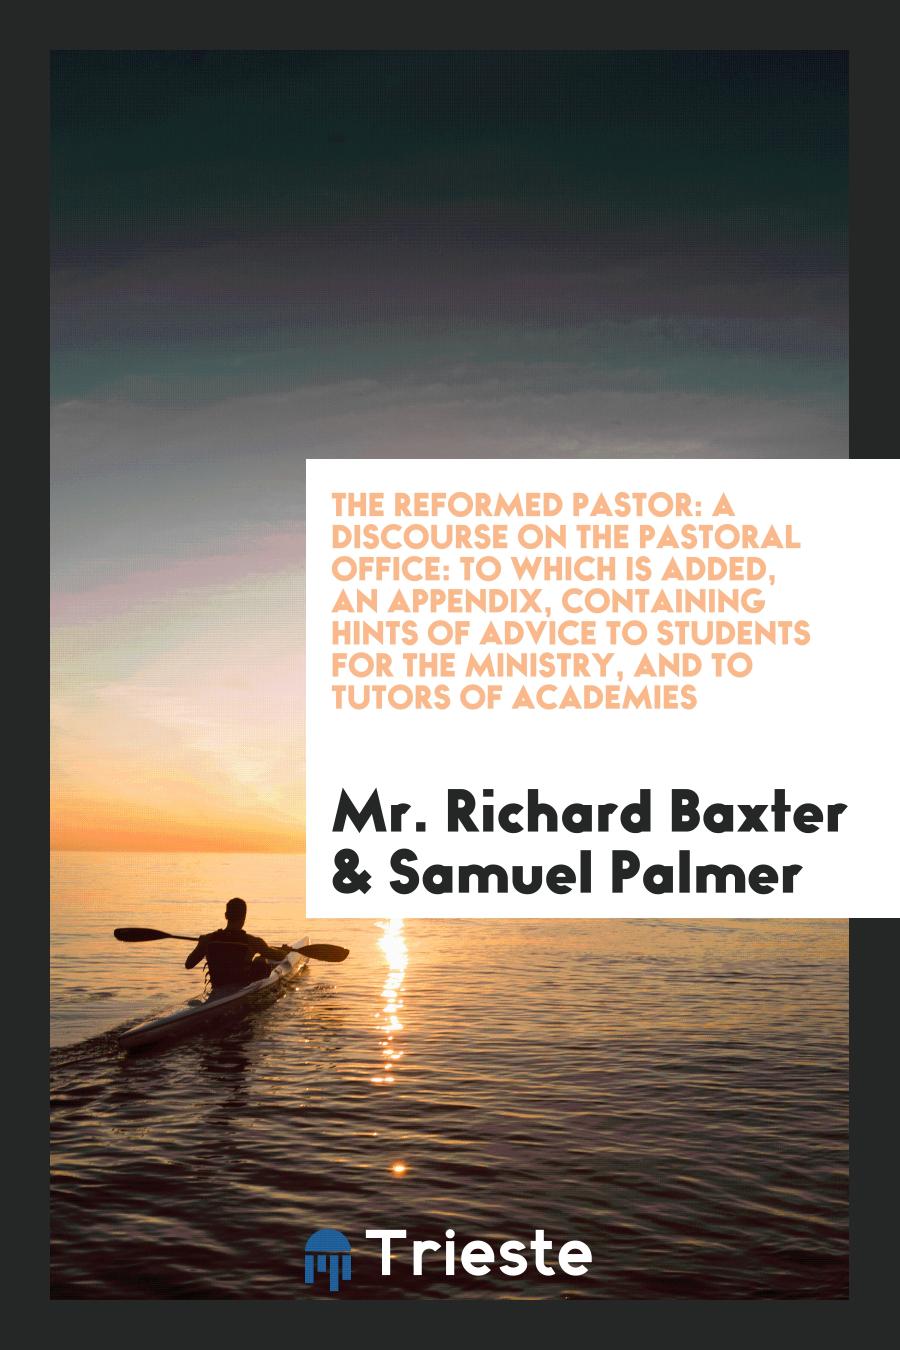 The Reformed Pastor: A Discourse on the Pastoral Office: To Which is Added, an Appendix, Containing Hints of Advice to Students for the Ministry, and to Tutors of Academies